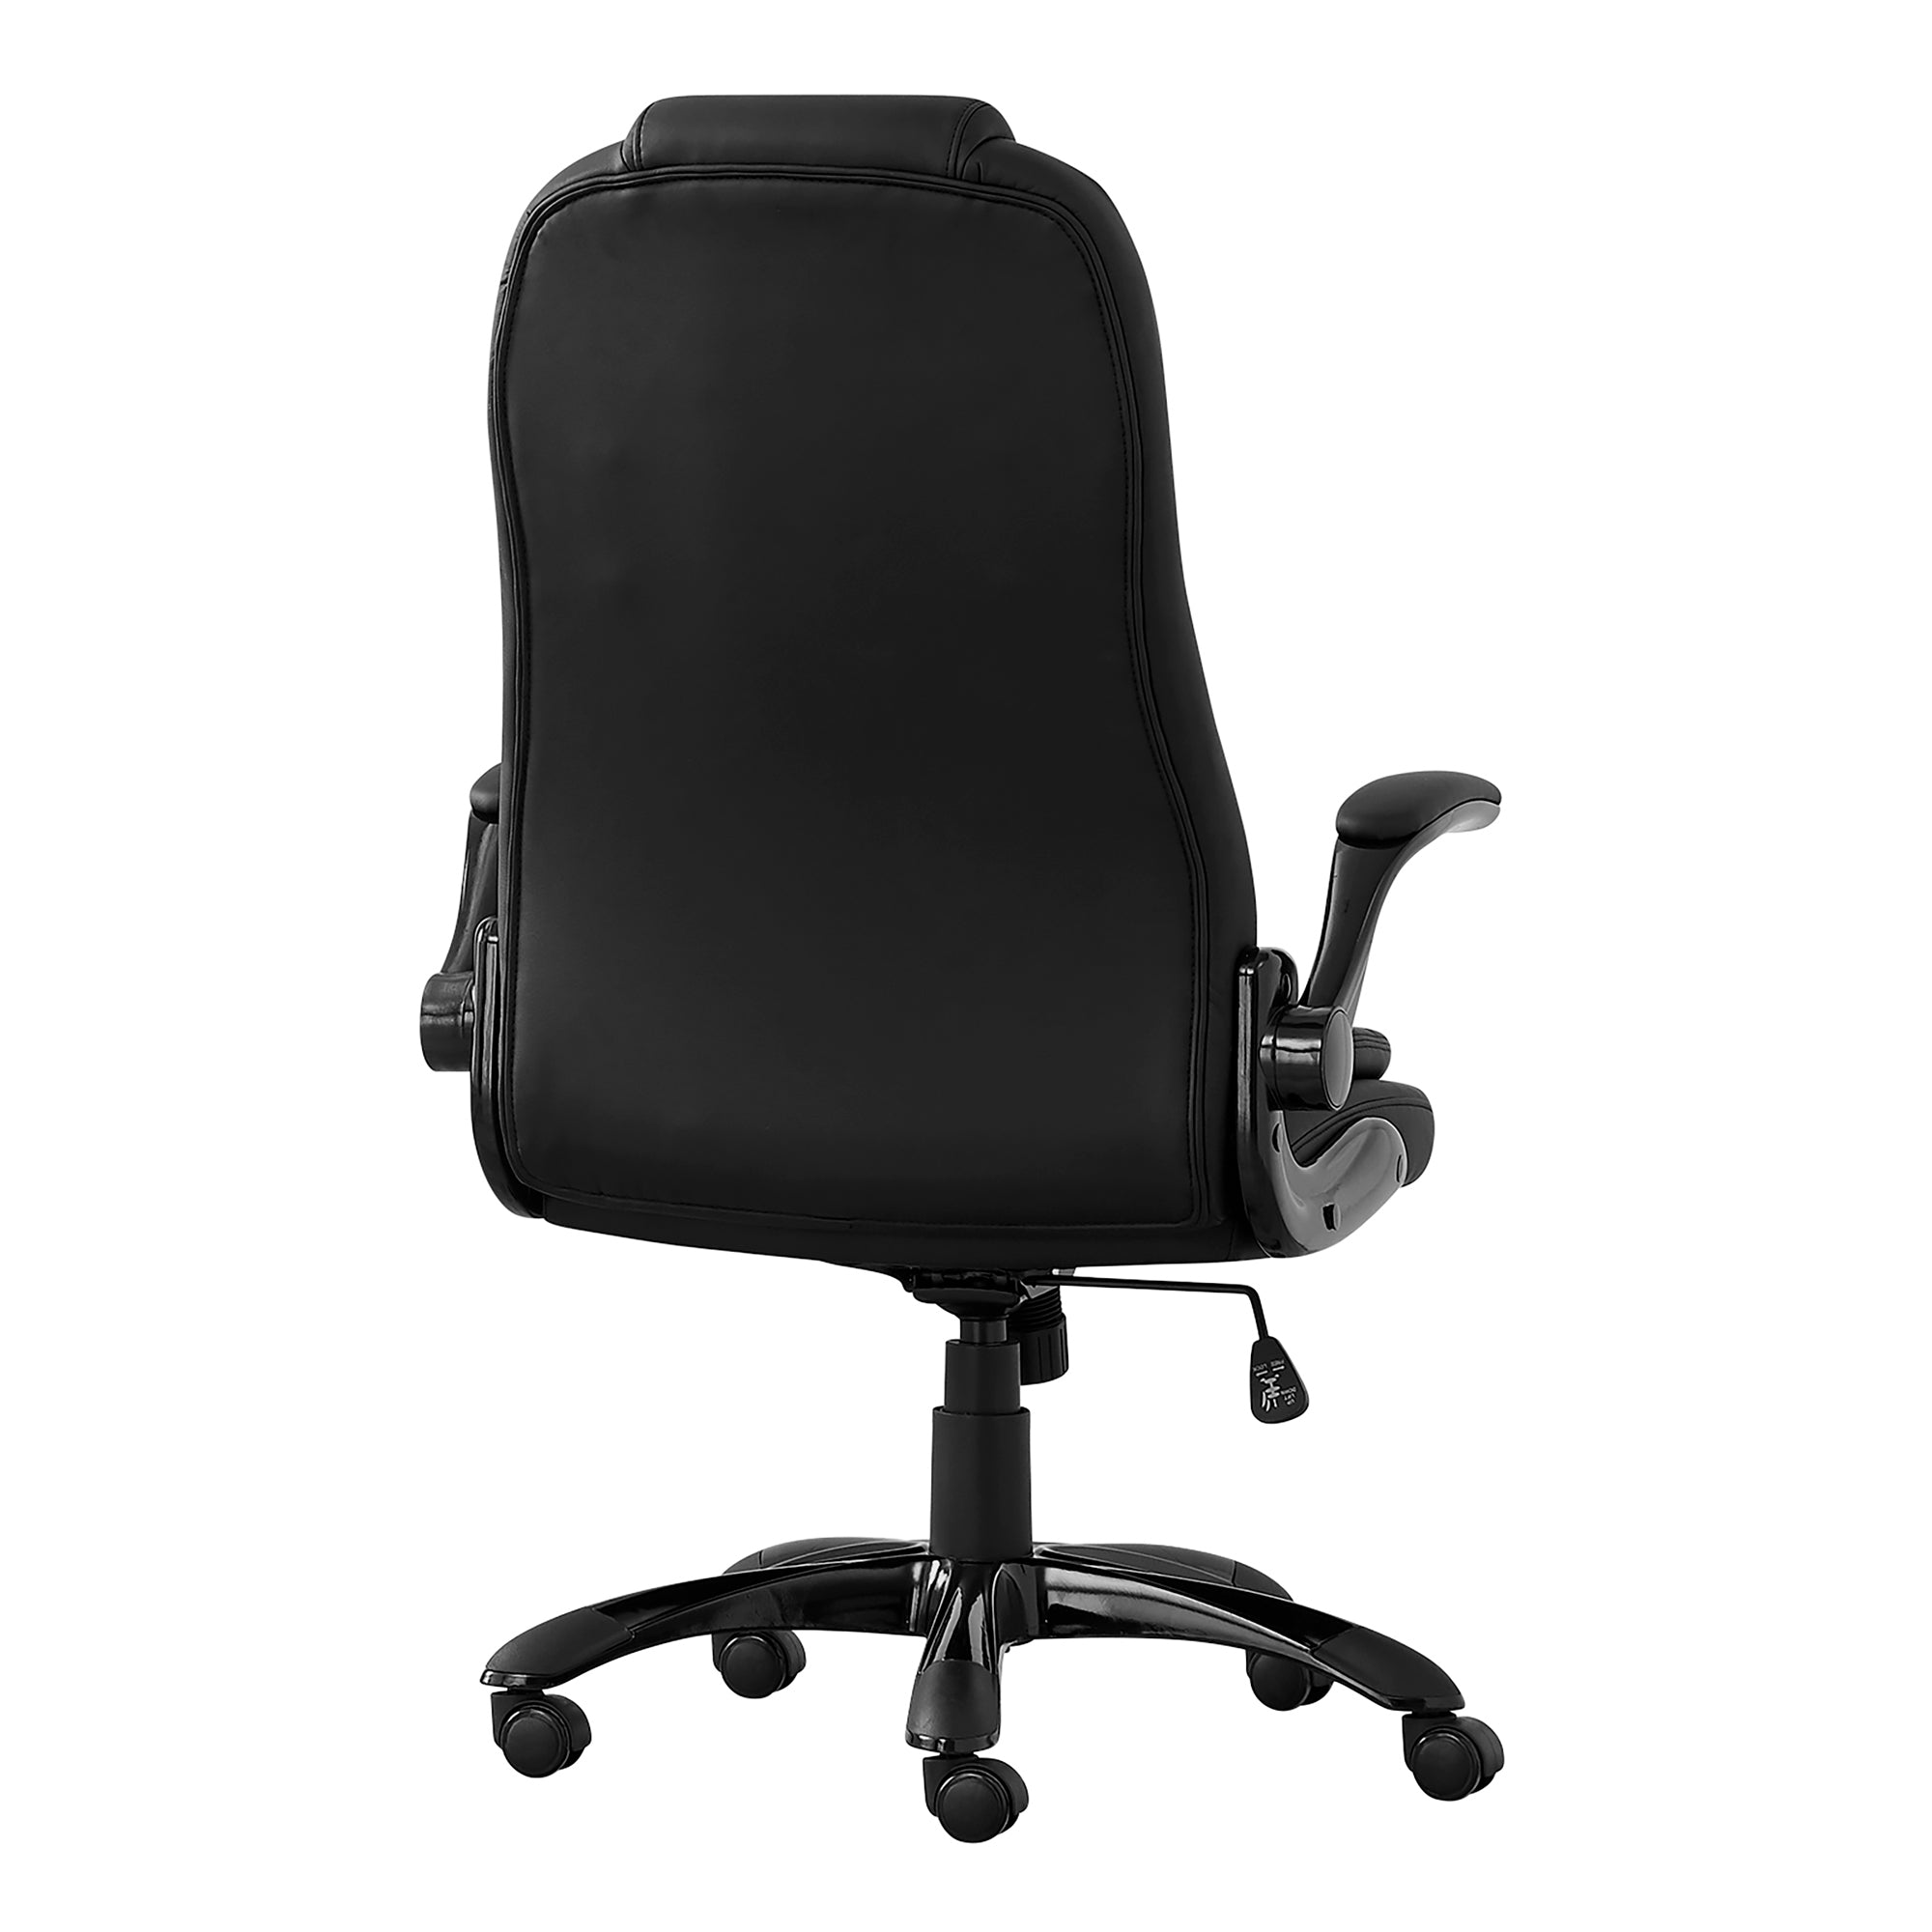 MN-867277    Office Chair, Adjustable Height, Swivel, Ergonomic, Armrests, Computer Desk, Office, Metal Base, Leather Look, Black, Contemporary, Modern